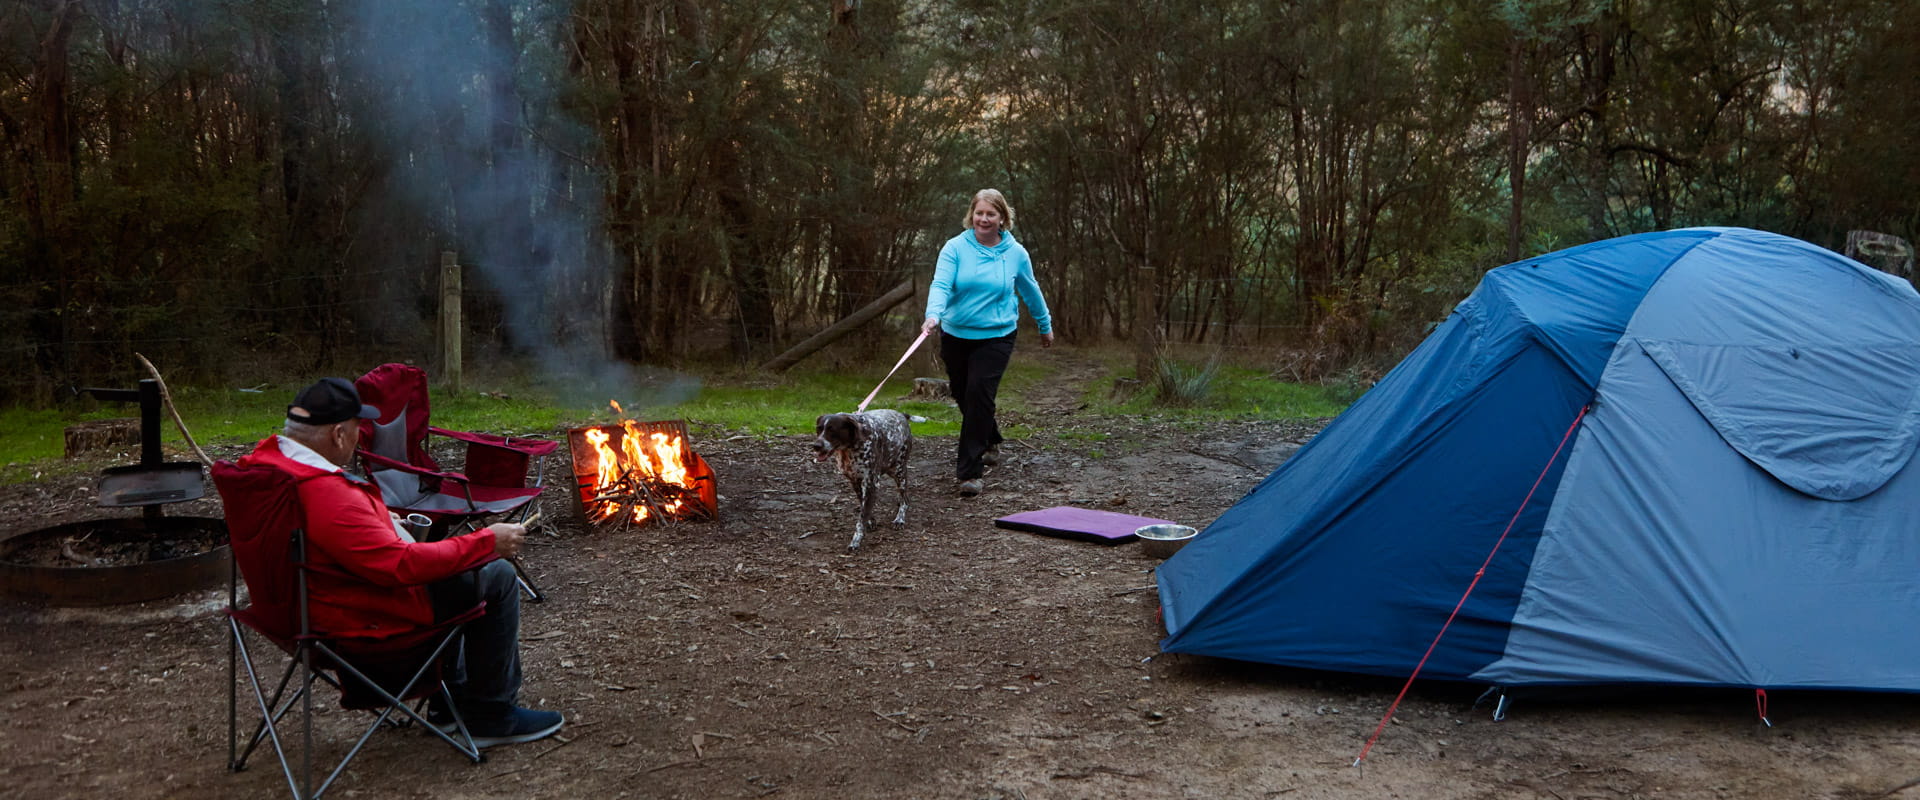 Two people camping in a bushland landscape. One walks a dog and the other sits by the camp fire. A tent nearby.